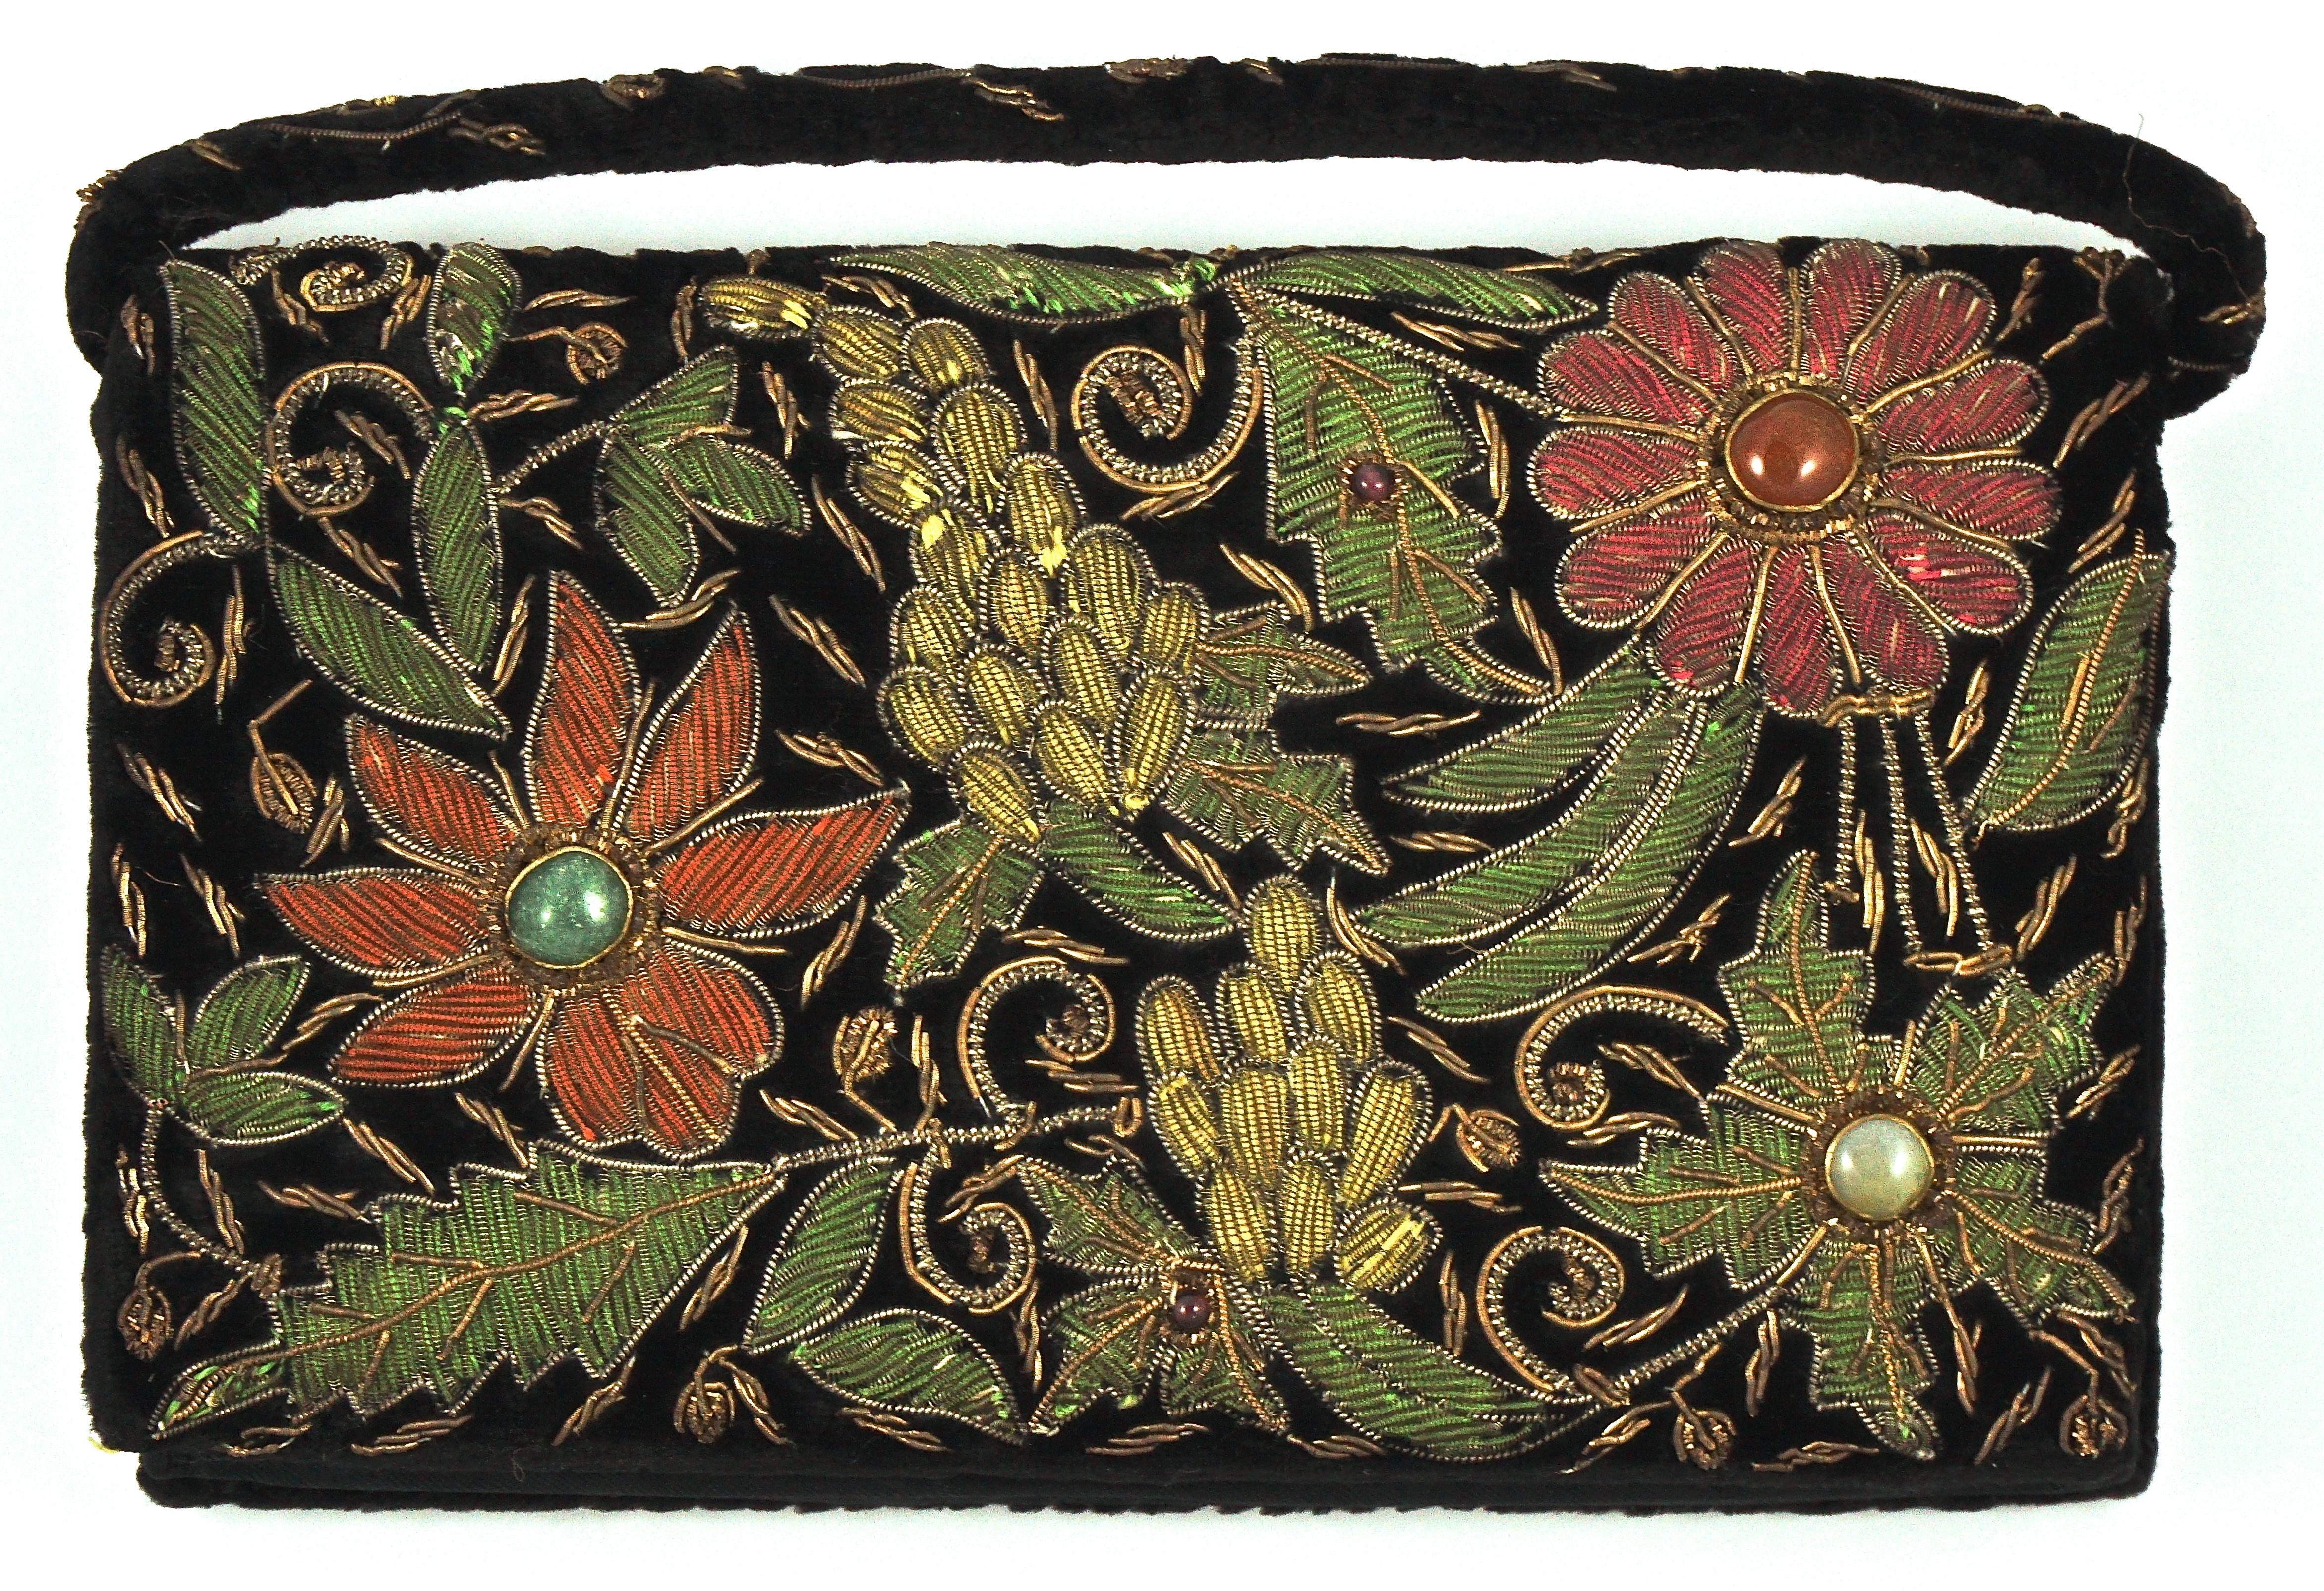 Zardozi floral embroidered black velvet handbag with a snap clasp, featuring golden and silver tone metal work and coloured stone decoration, circa 1950s. The embroidery covers the front and reverse, and the handle is also embroidered. Measuring